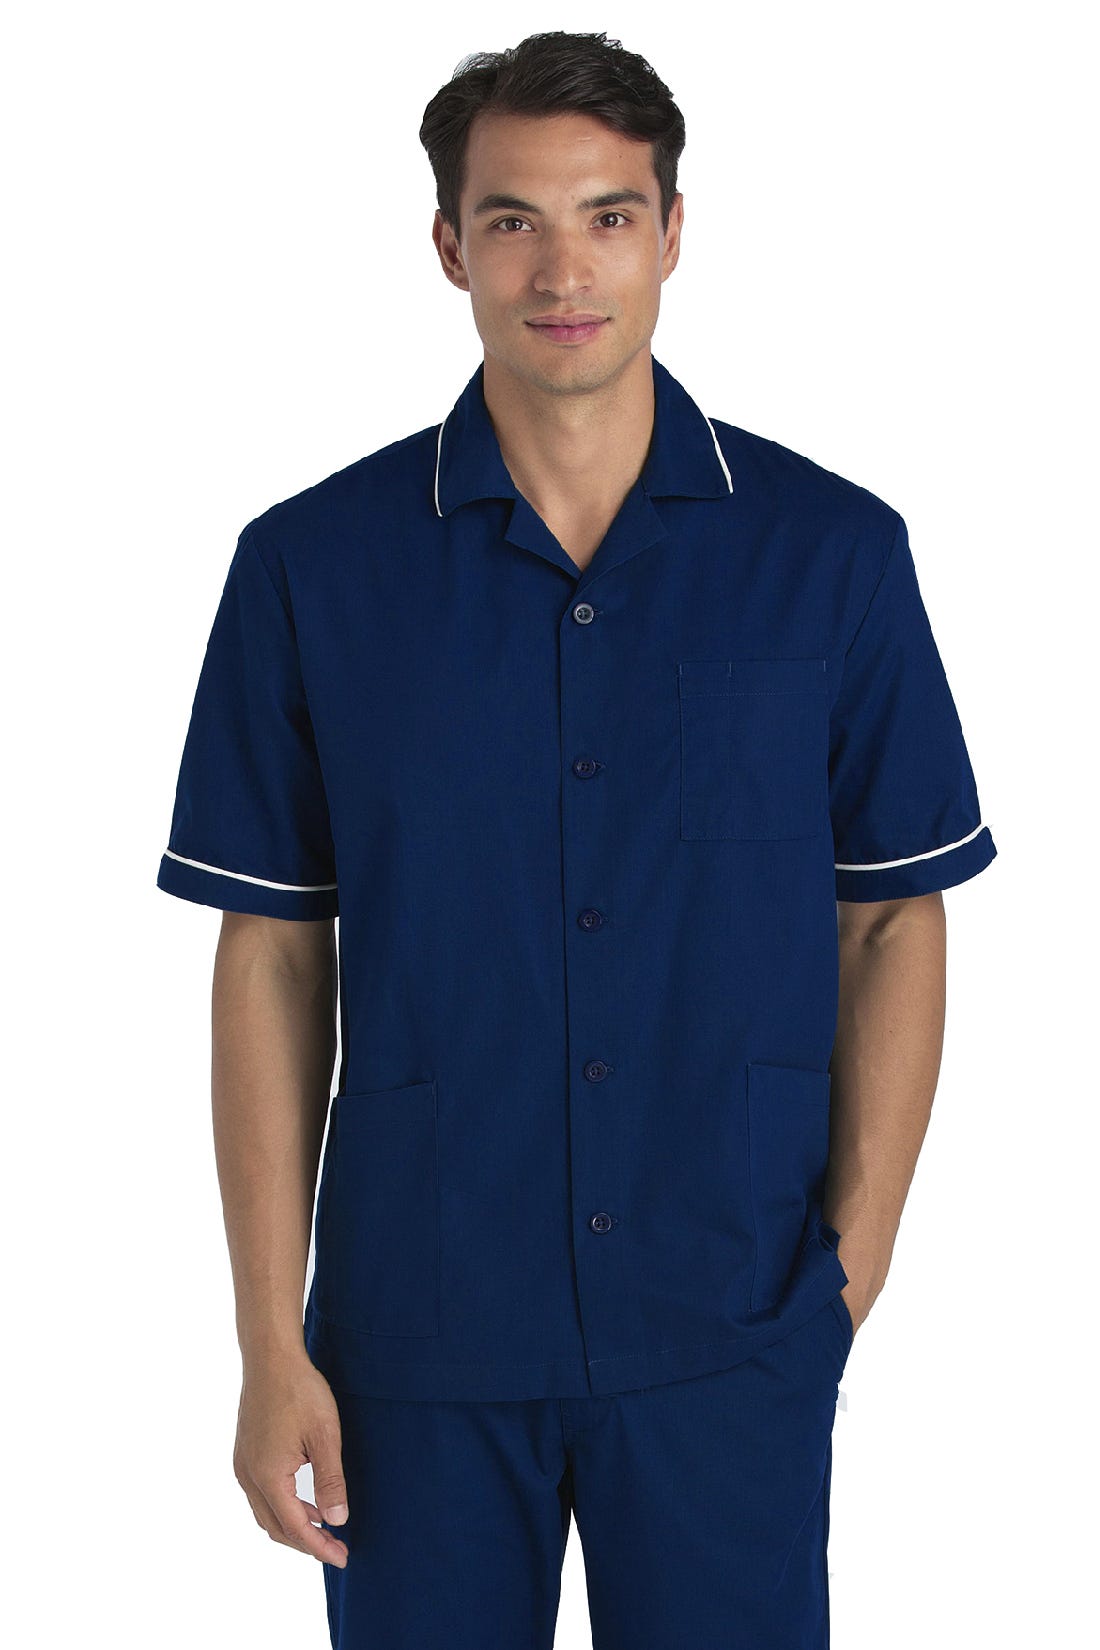 Best Scrubs and Lab Coats for Men and Women - Protect U - Medium